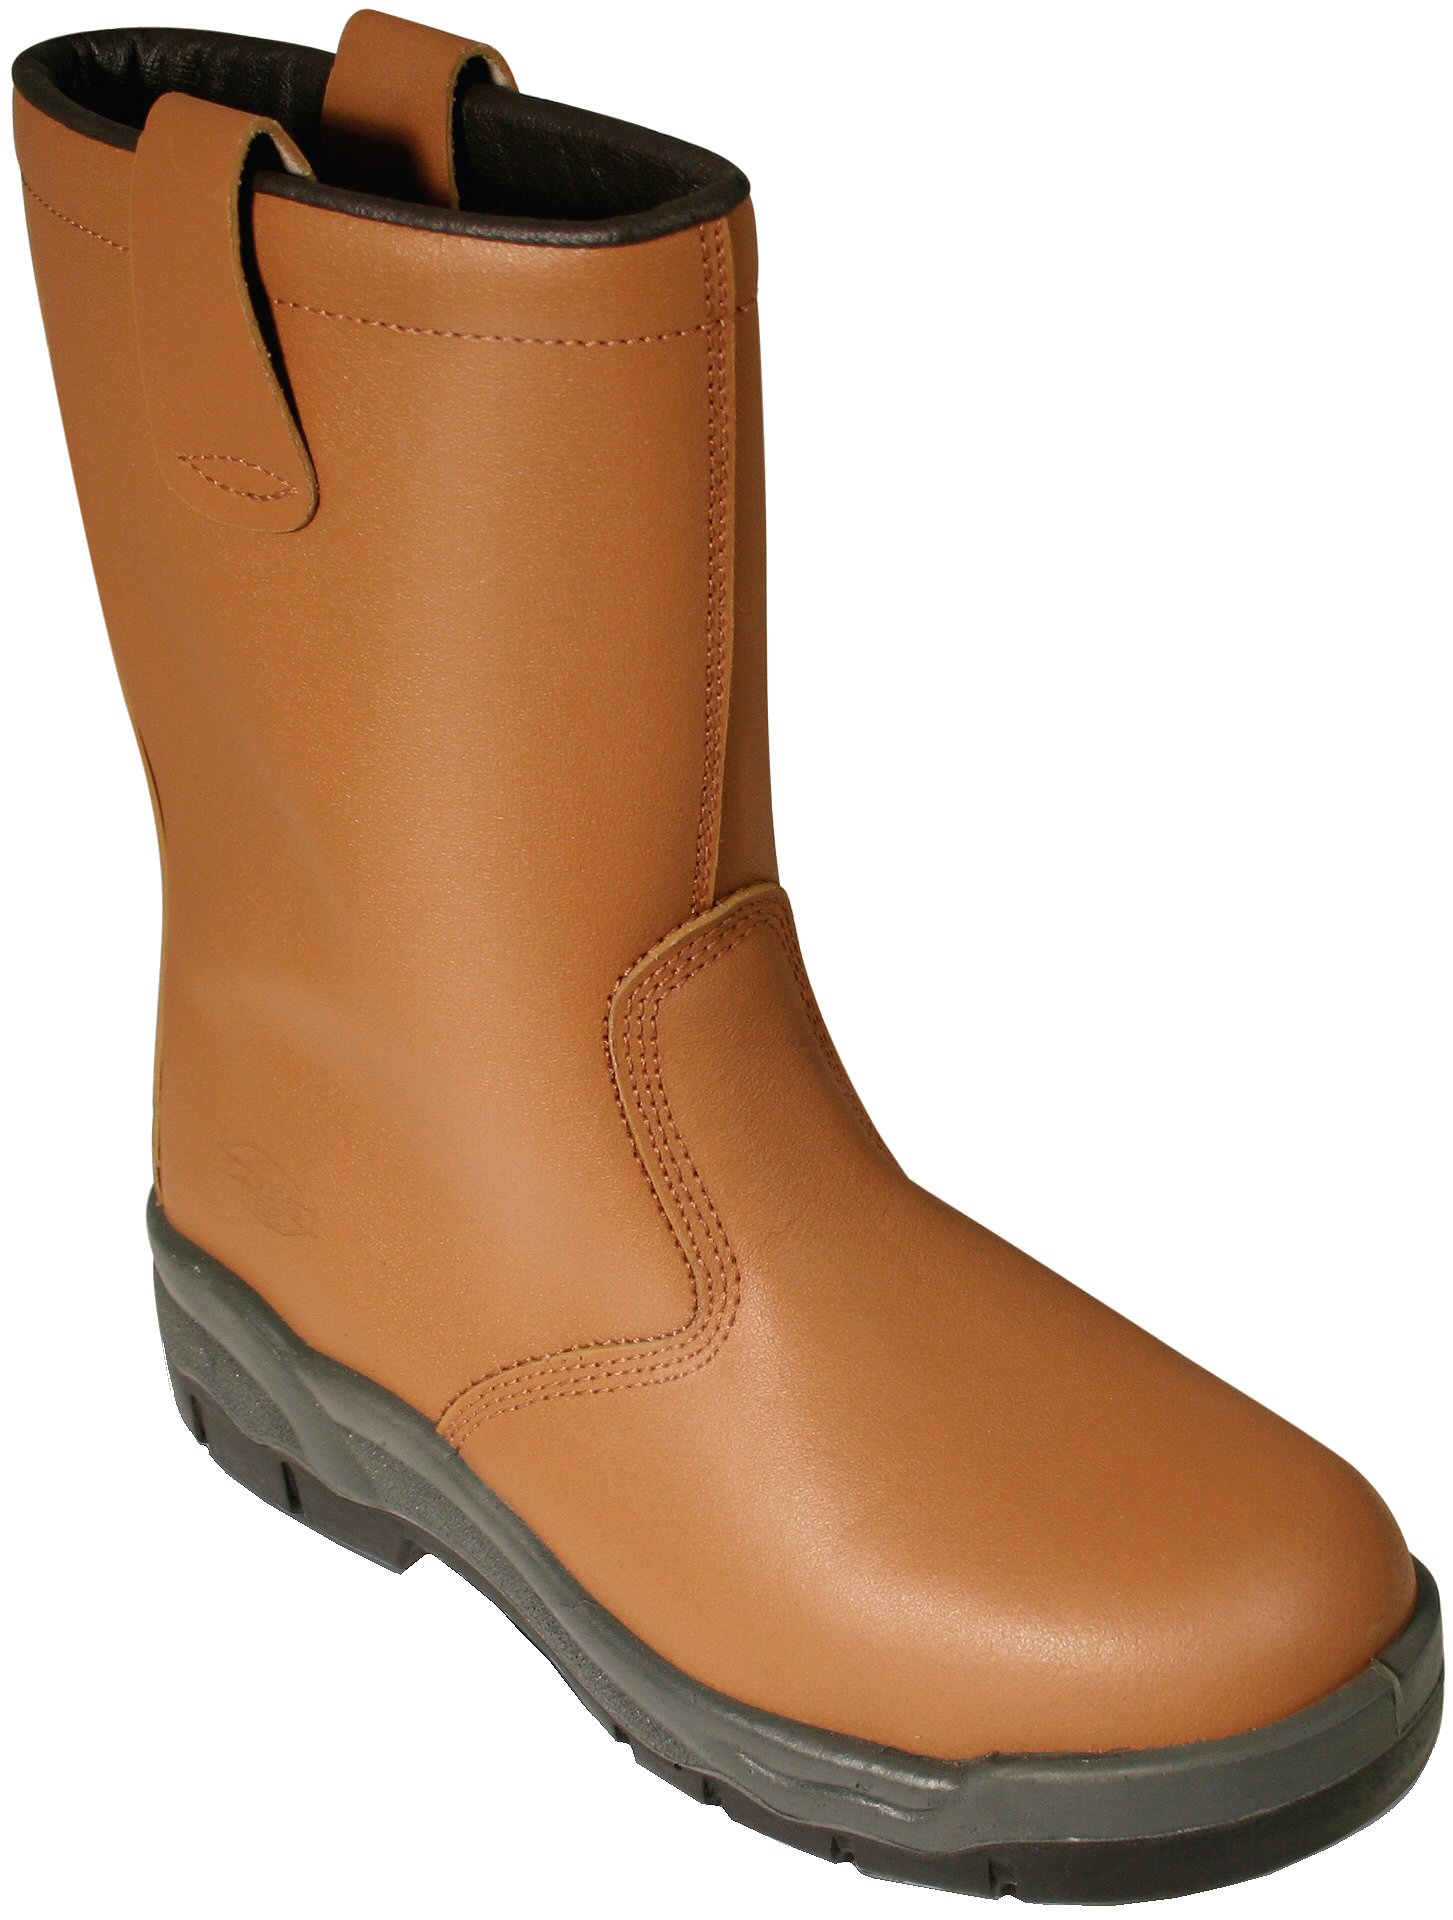 Unbranded Lined Rigger Boot